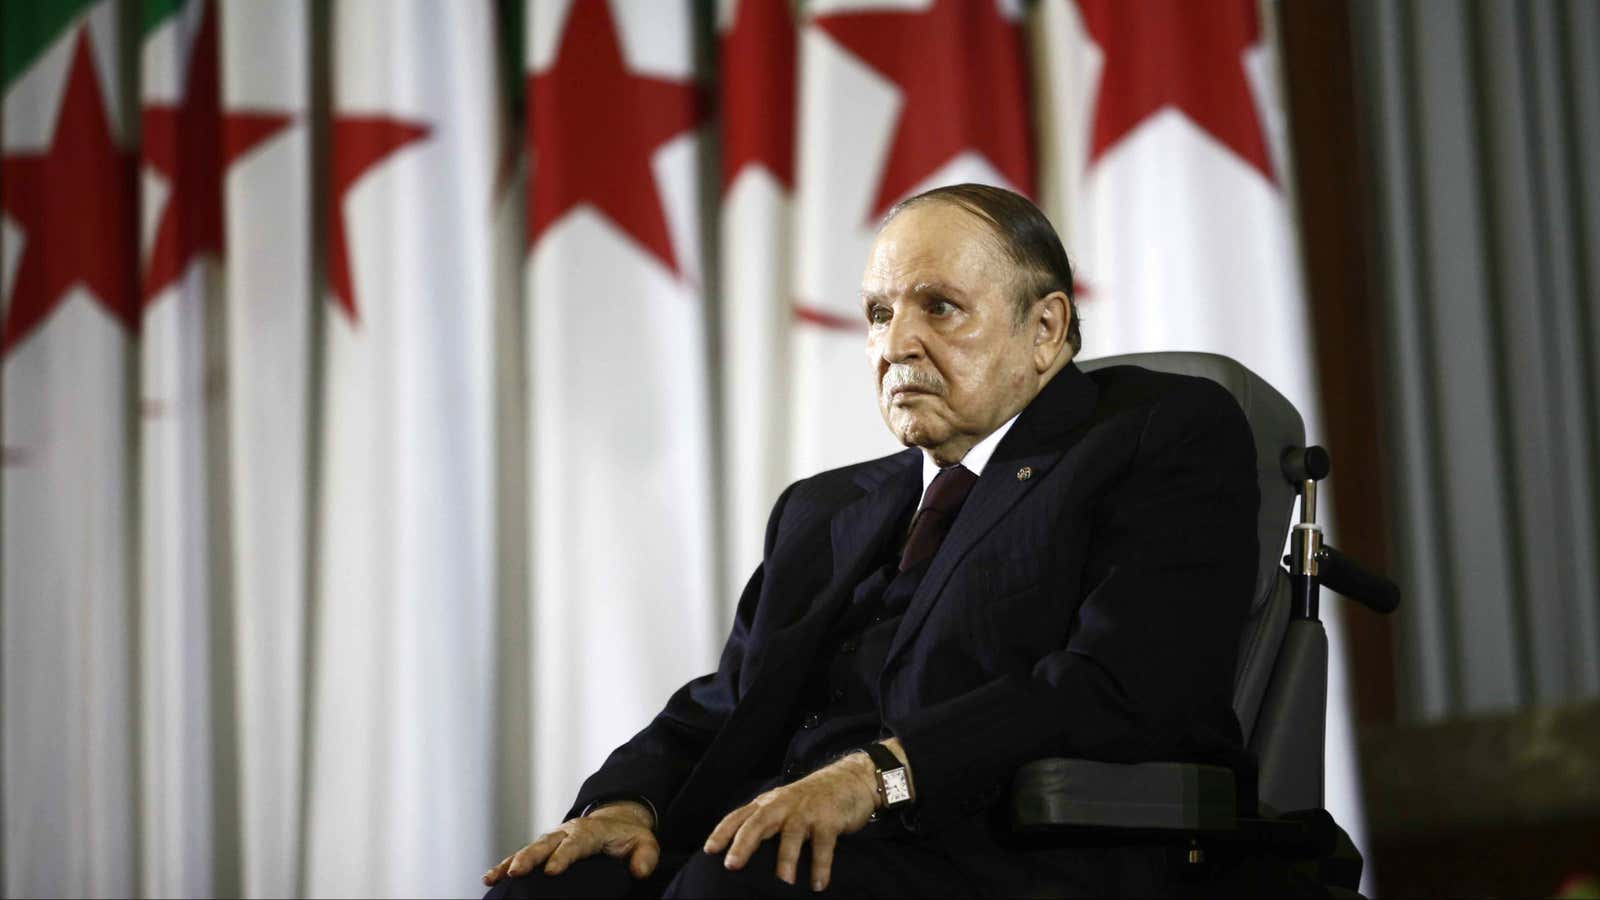 The ailing Abdelaziz Bouteflika may be losing his grip on power in Algeria.